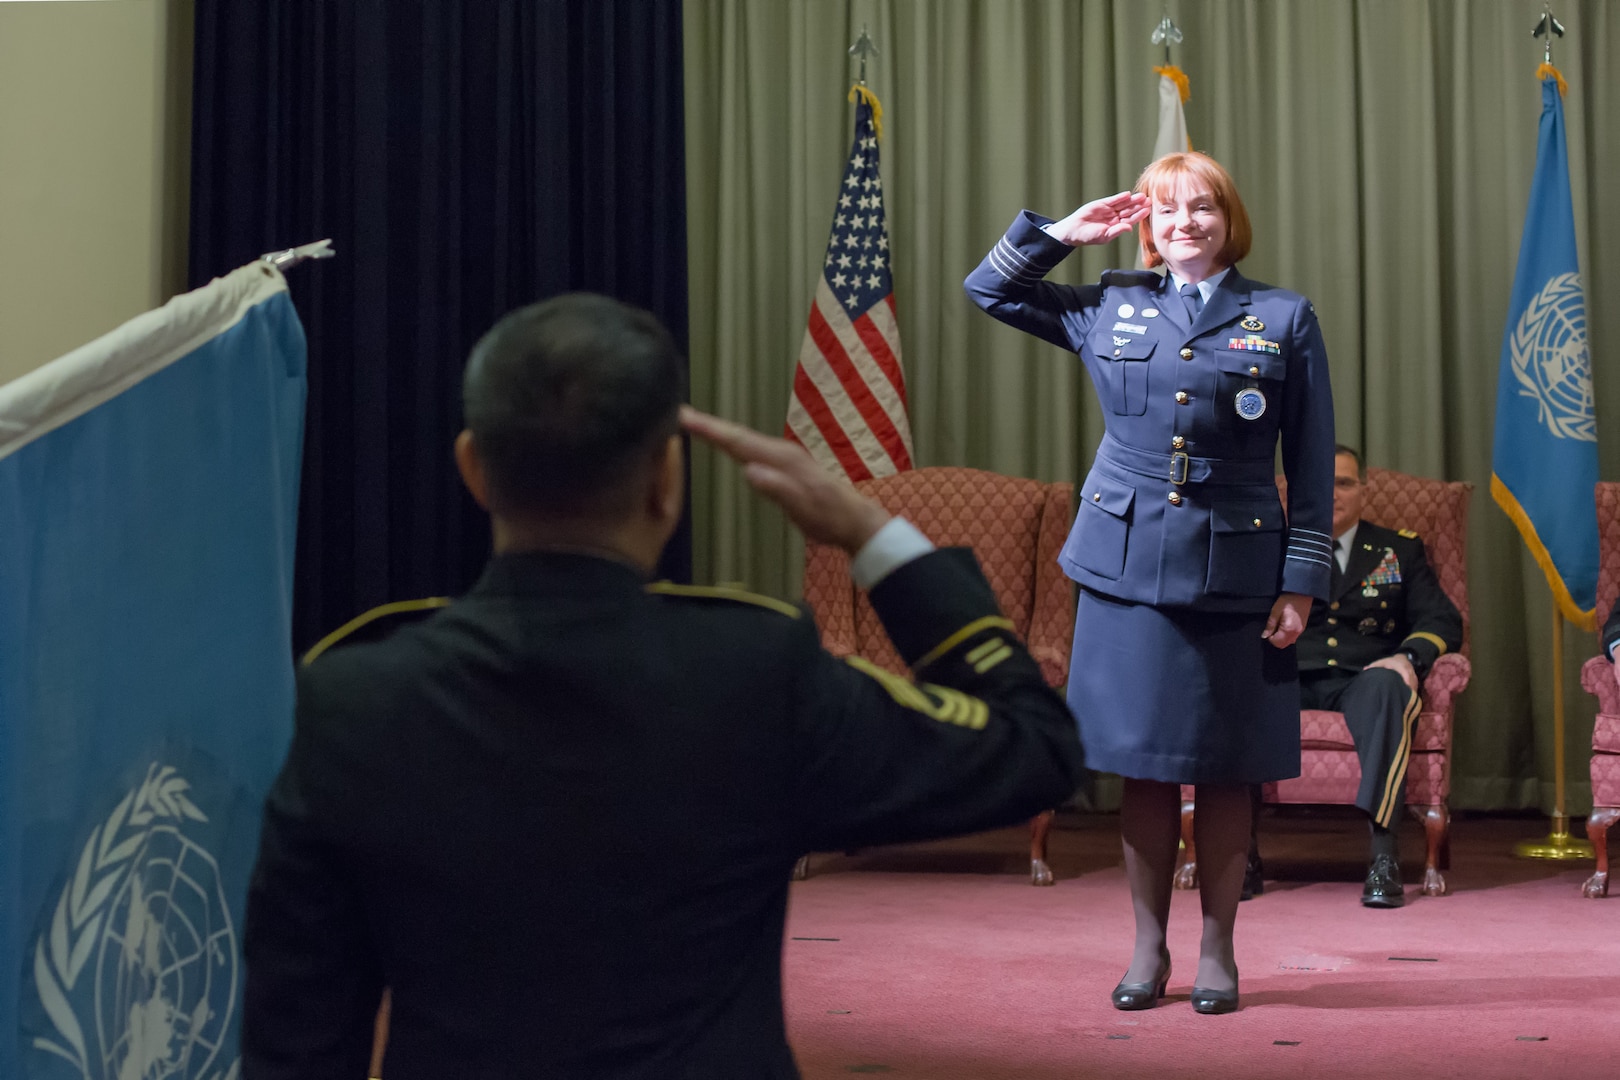 Royal Australia Air Force Group Captain Barbara Courtney, United Nations Command (Rear) commander, renders her first salute as commander during the UNC (Rear) change of command ceremony at Yokota Air Base, Japan, Jan. 28, 2014. Courtney assumed command from Royal Australia Air Force Group Captain Luke Stoodley. (U.S. Air Force photo by Osakabe Yasuo/Released)